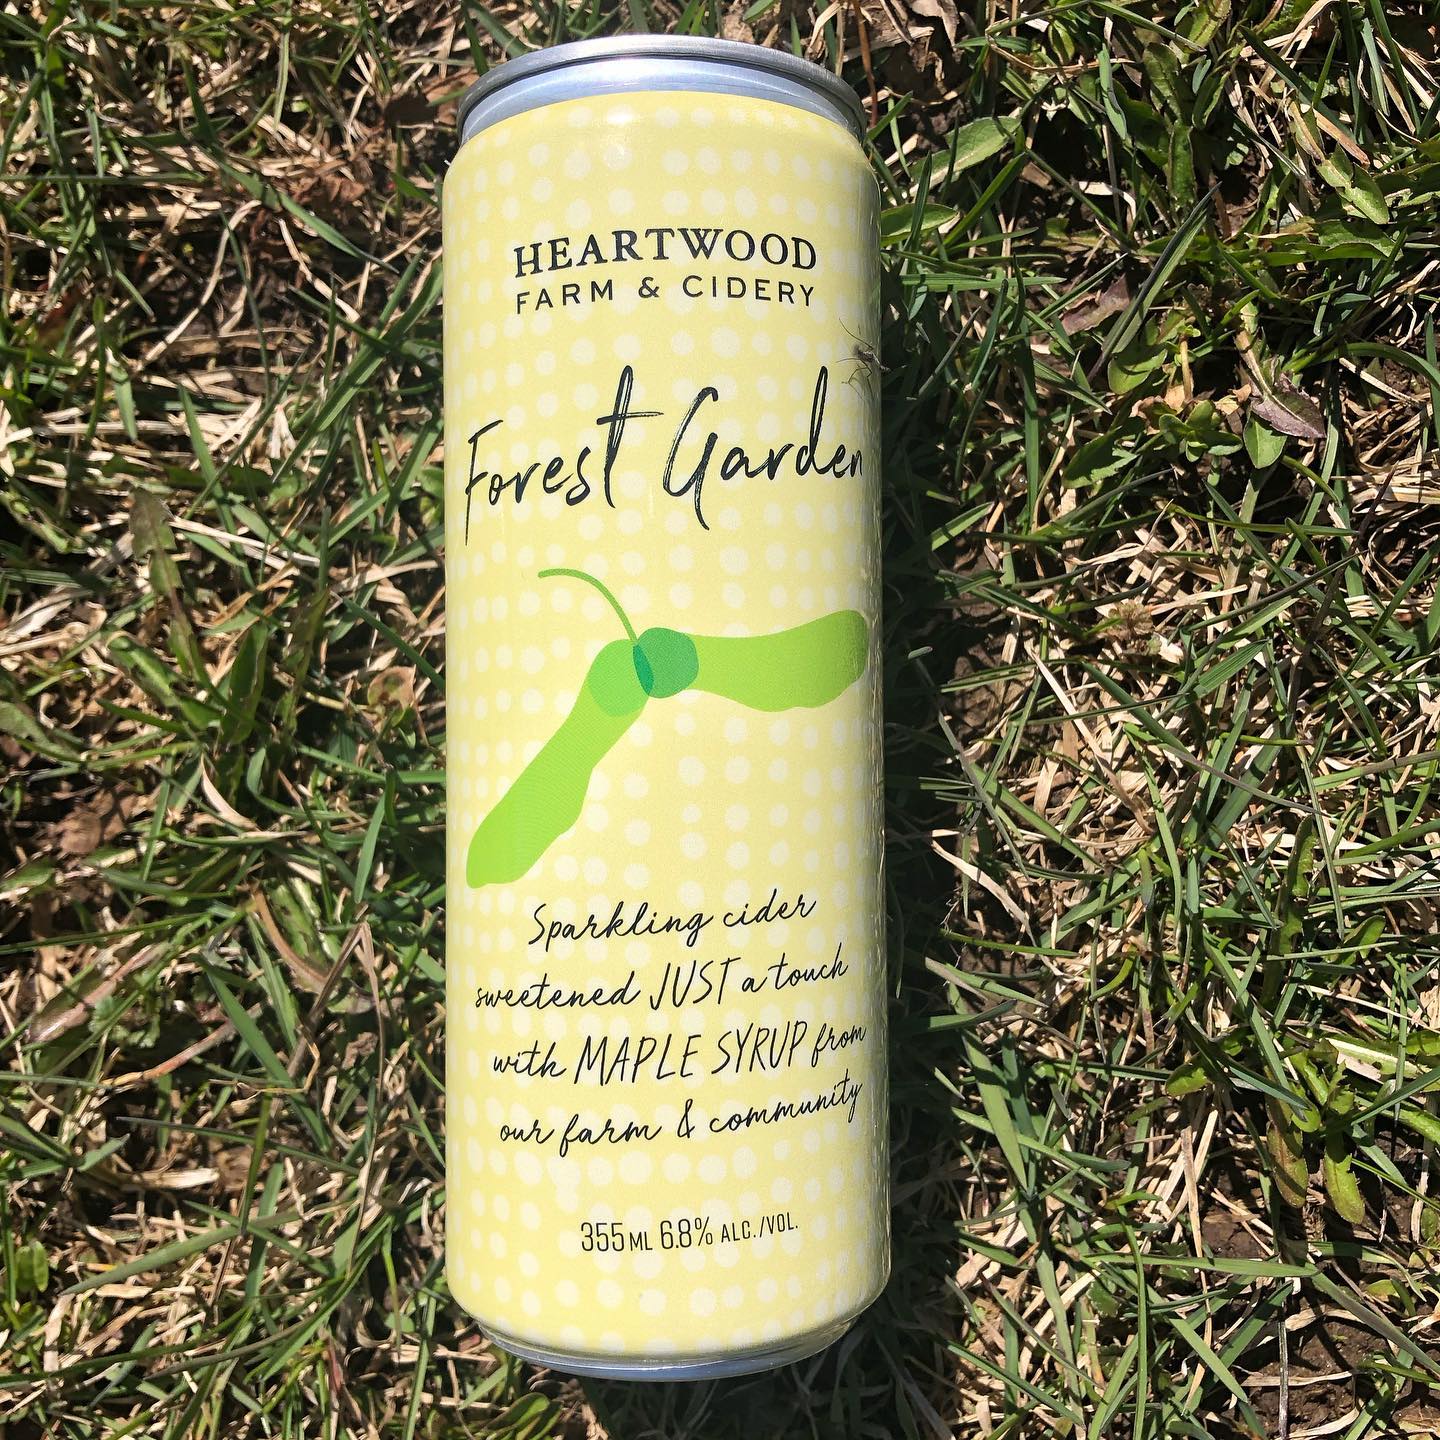 forest garden cider from heartwood laying on the grass